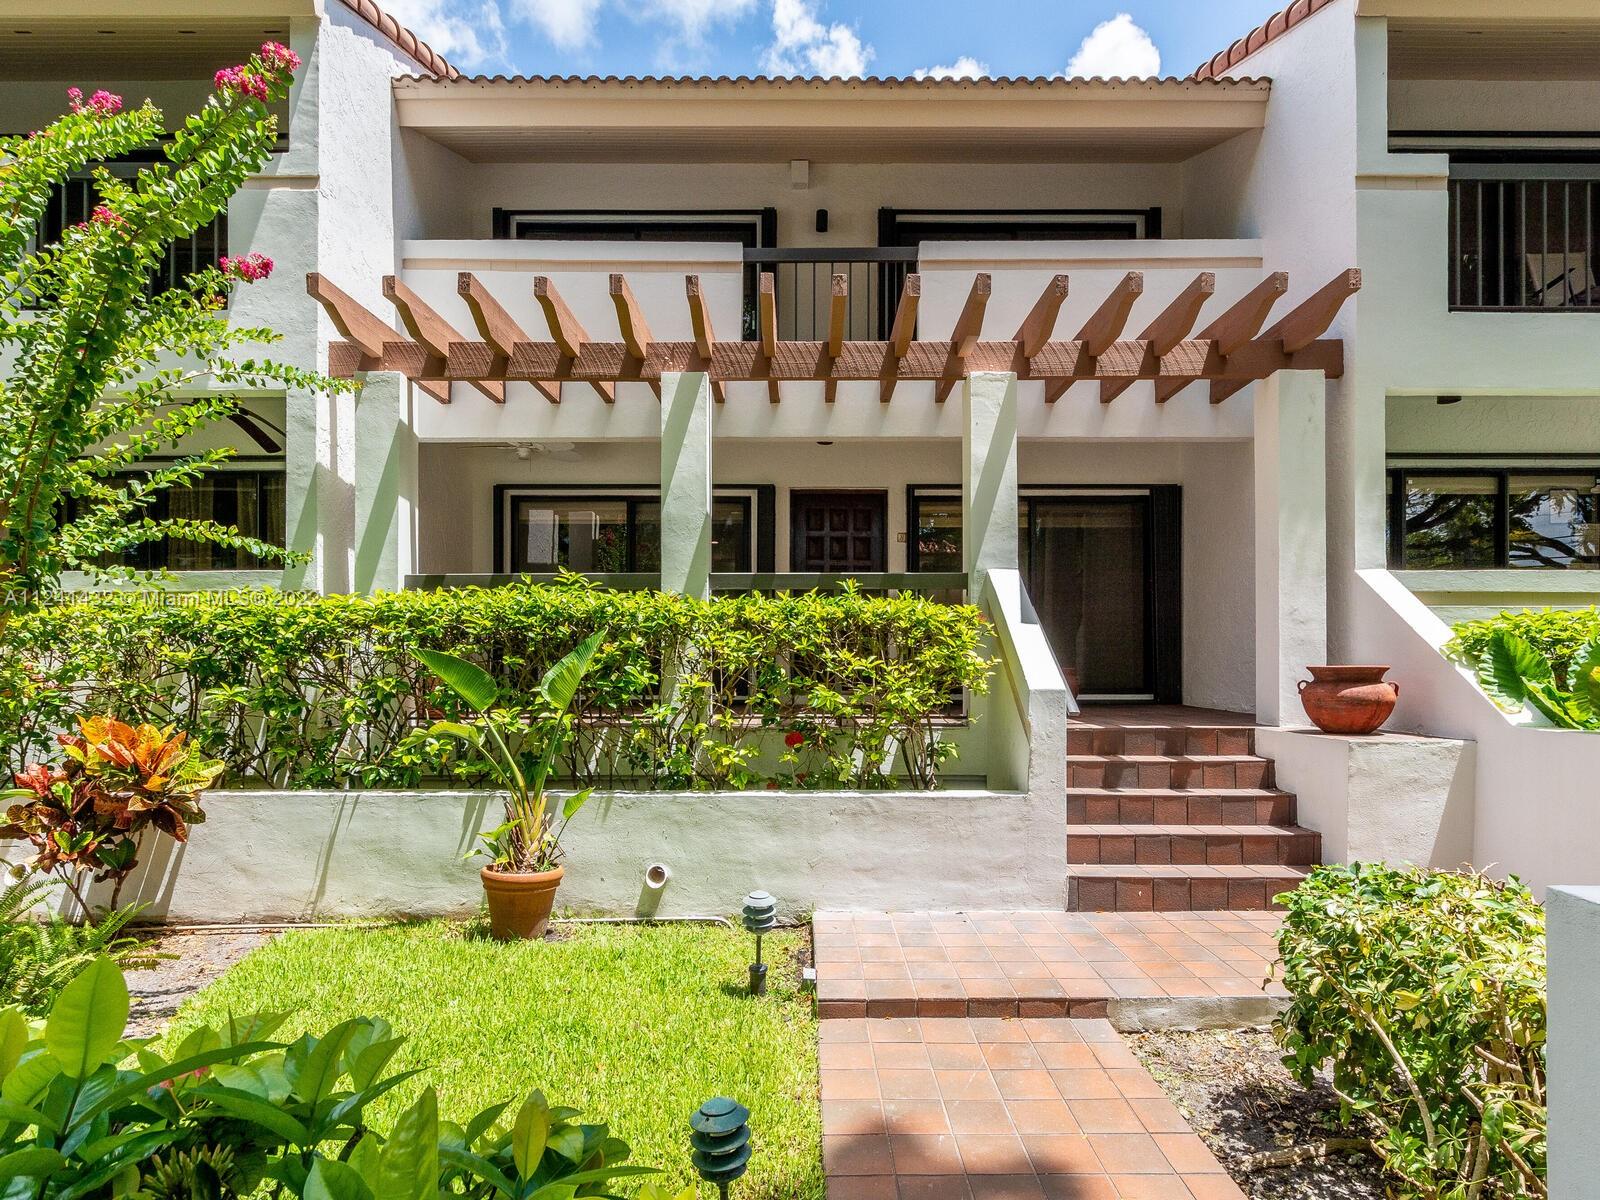 Be the first to live in this newly remodeled 3 bedroom, 3 bathroom 2-story townhome at Biltmore Court Villas. This sought after residence is located in the exclusive Biltmore Section of Coral Gables, surrounded by luxurious award winning architecture, historial landmarks, The Biltmore Hotel, Granada Golf Course, parks, tennis courts and Downtown Coral Gables.  This unique 1,752 sq ft residence offers a spacious and bright living/dining room, beautiful kitchen with top-of-the line appliances and a third bedroom and bathroom on the first floor. The second floor has a serene and very generous master bedroom, master bathroom, built-in walk-in closet and a very generous second bedroom with an ensuite bathroom. Charming pool with a Barbecue area, 2 assigned parking spaces and storage room.